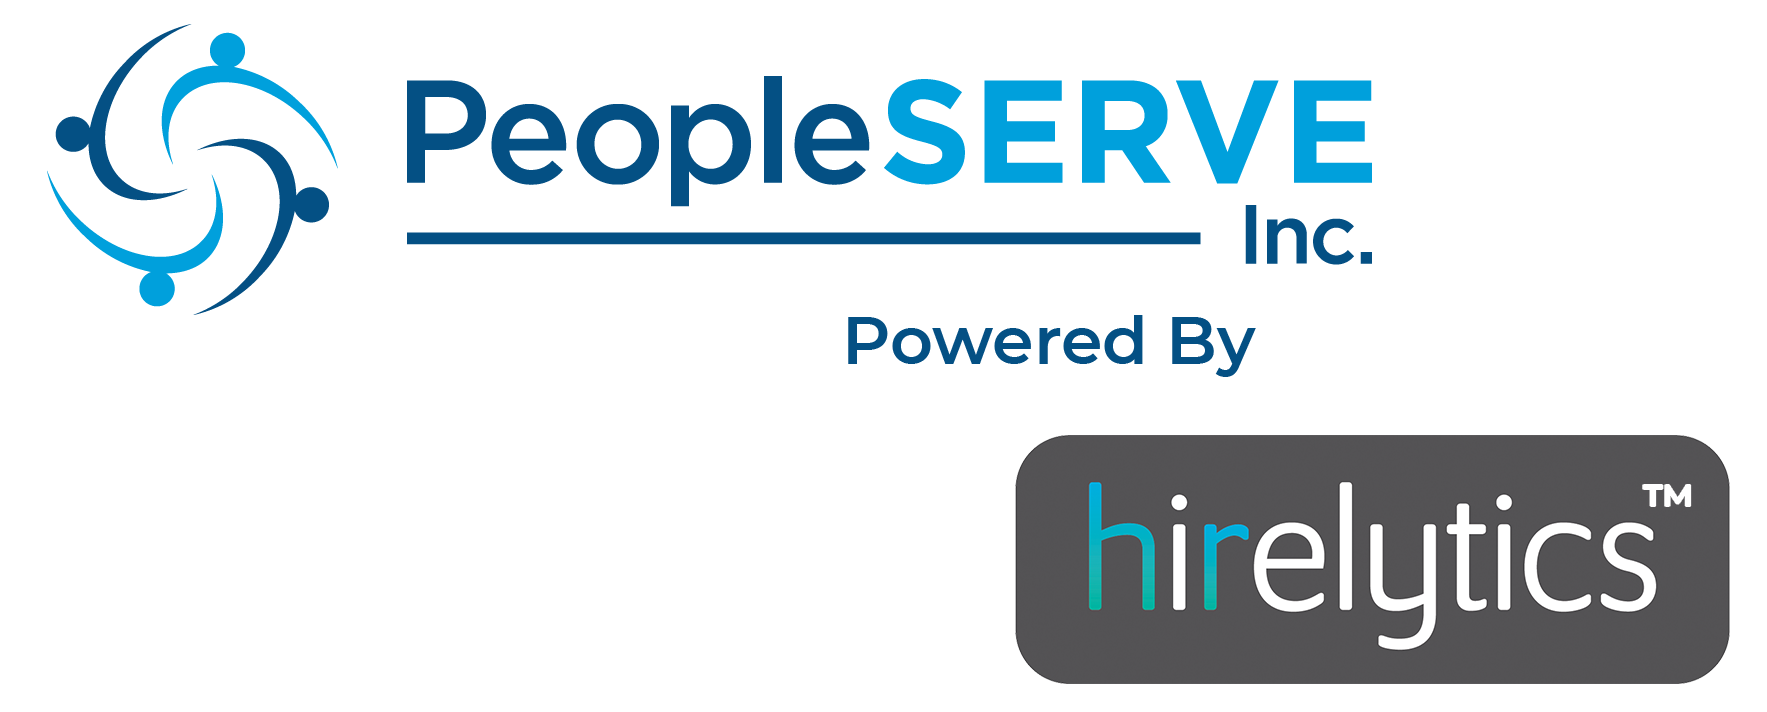 PeopleSERVE, Inc. Releases Hirelytics™, a Software Application That Incorporates People Analytics Into the Talent Acquisition & Retention Process